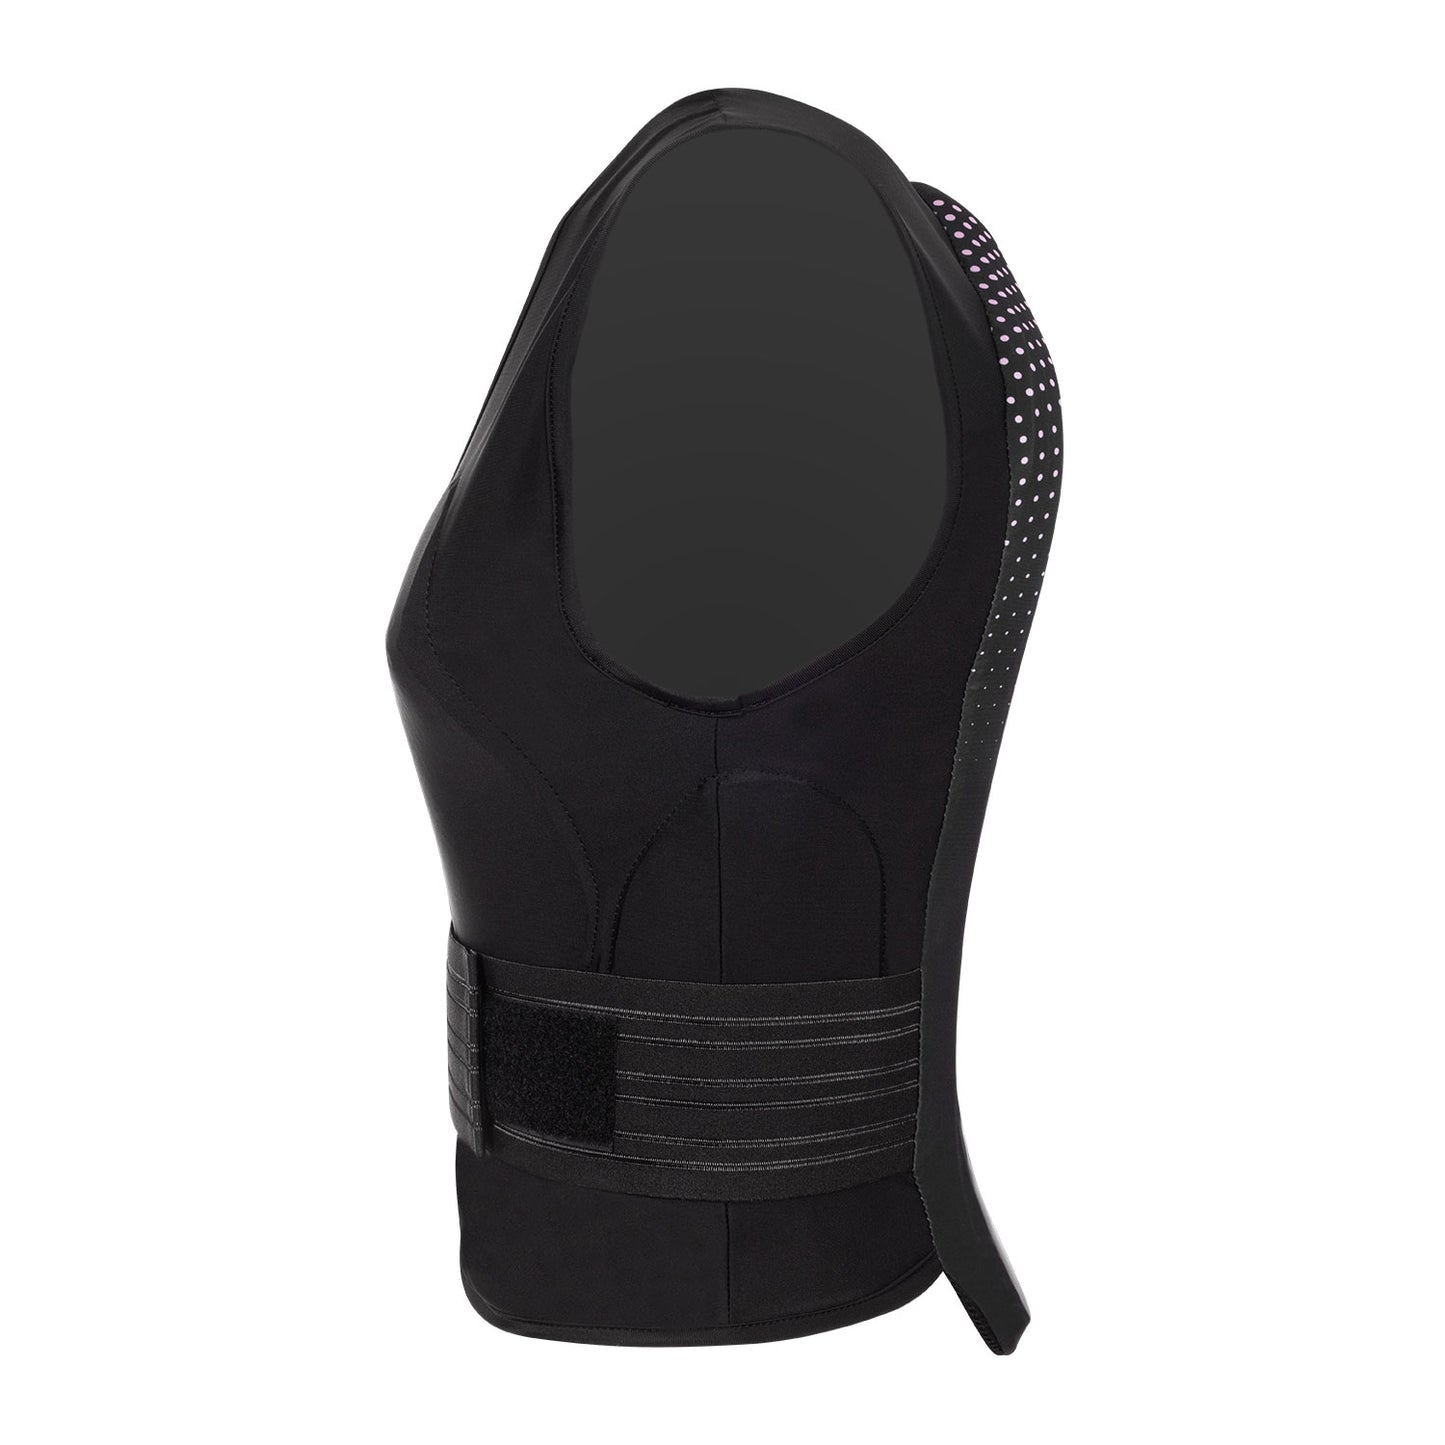 EQUESTRO - ADULT Level 2 Back Protector